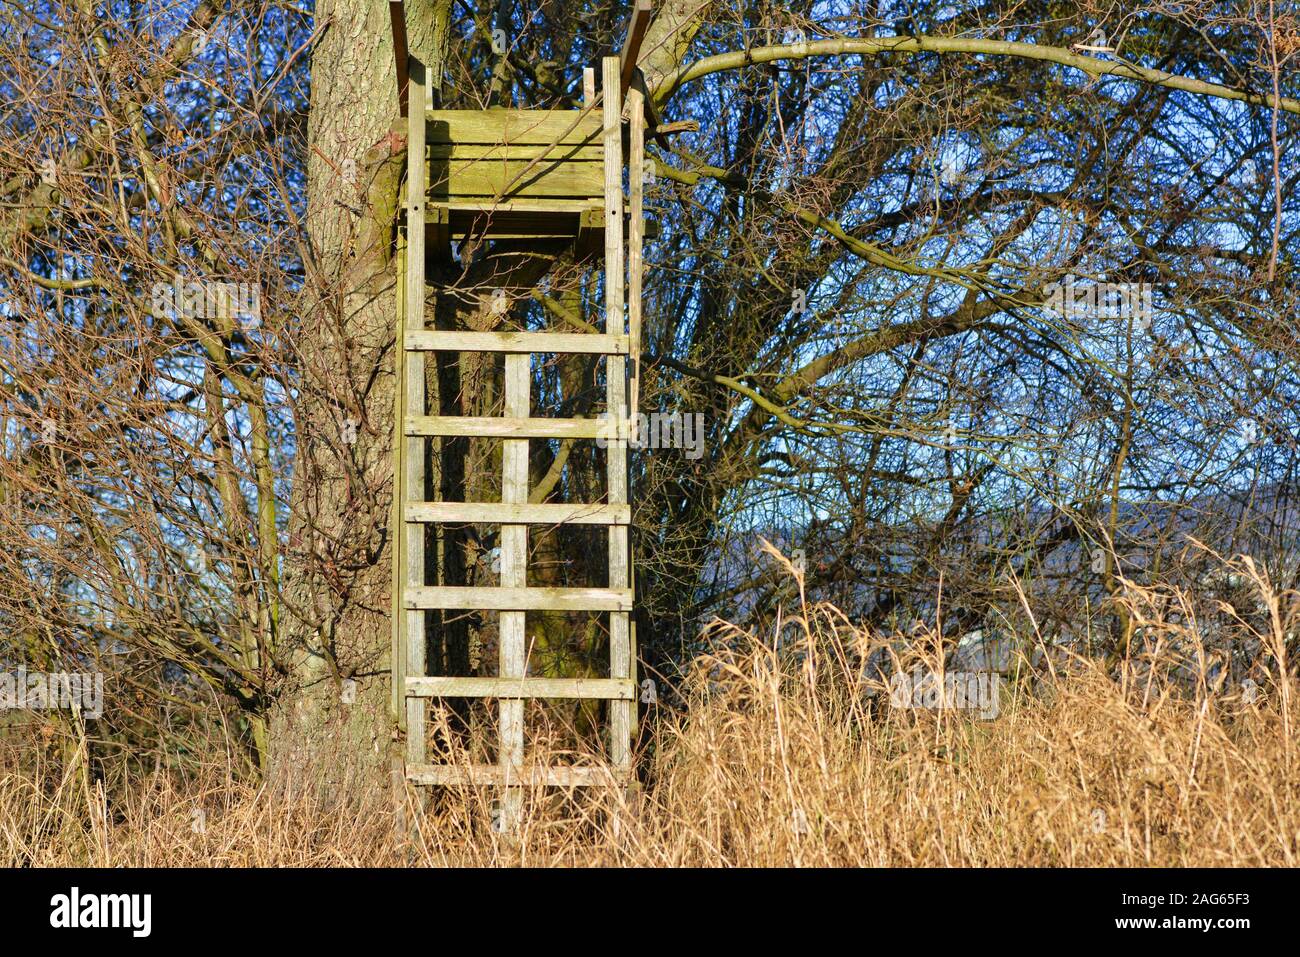 Simple wooden raised tree ladder stand secured to a tree as vantage point for hunters Stock Photo